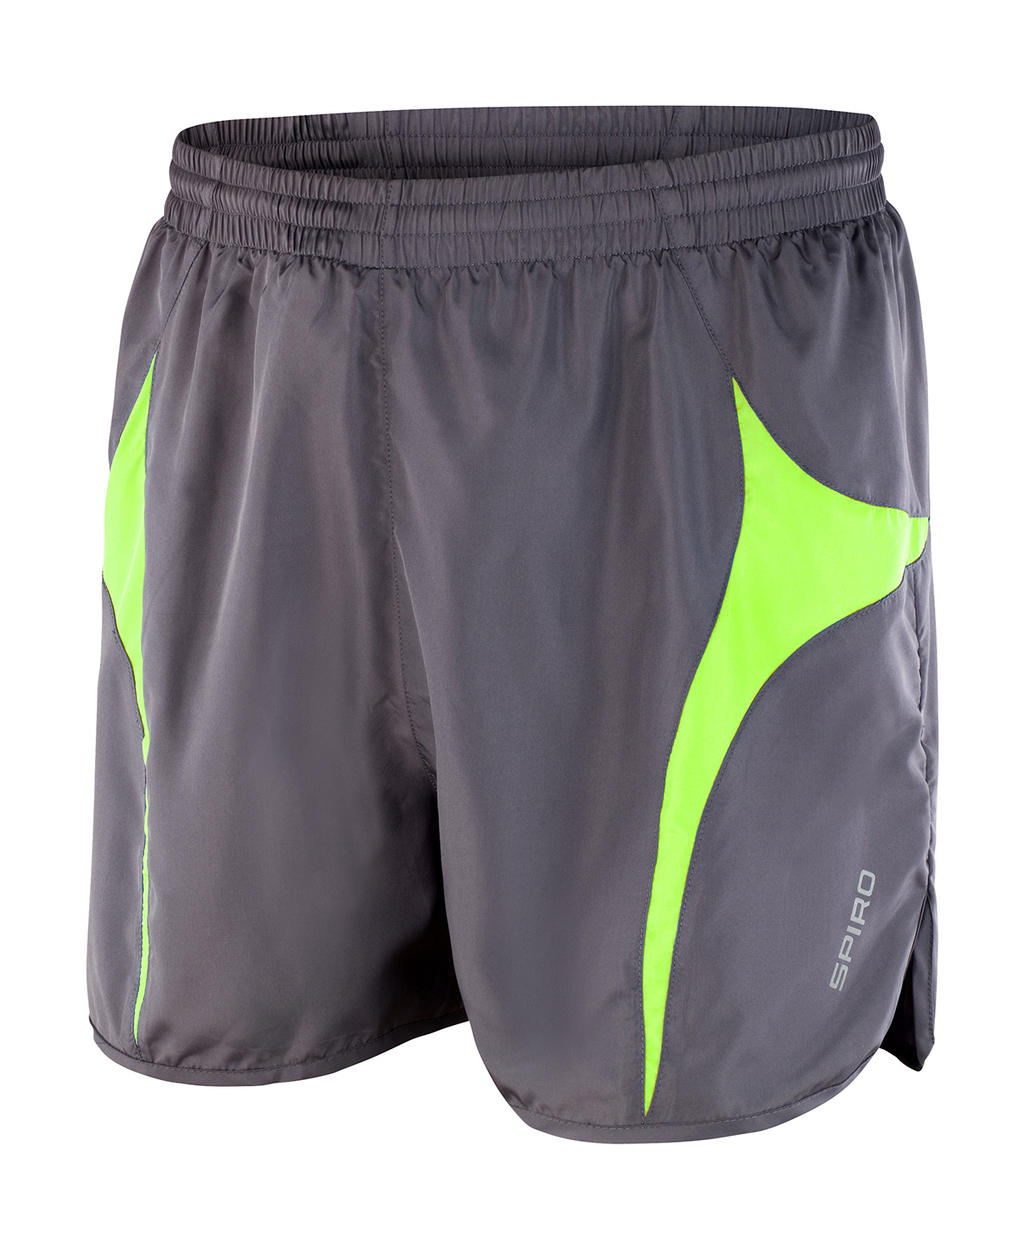  Unisex Micro Lite Running Shorts in Farbe Grey/Lime